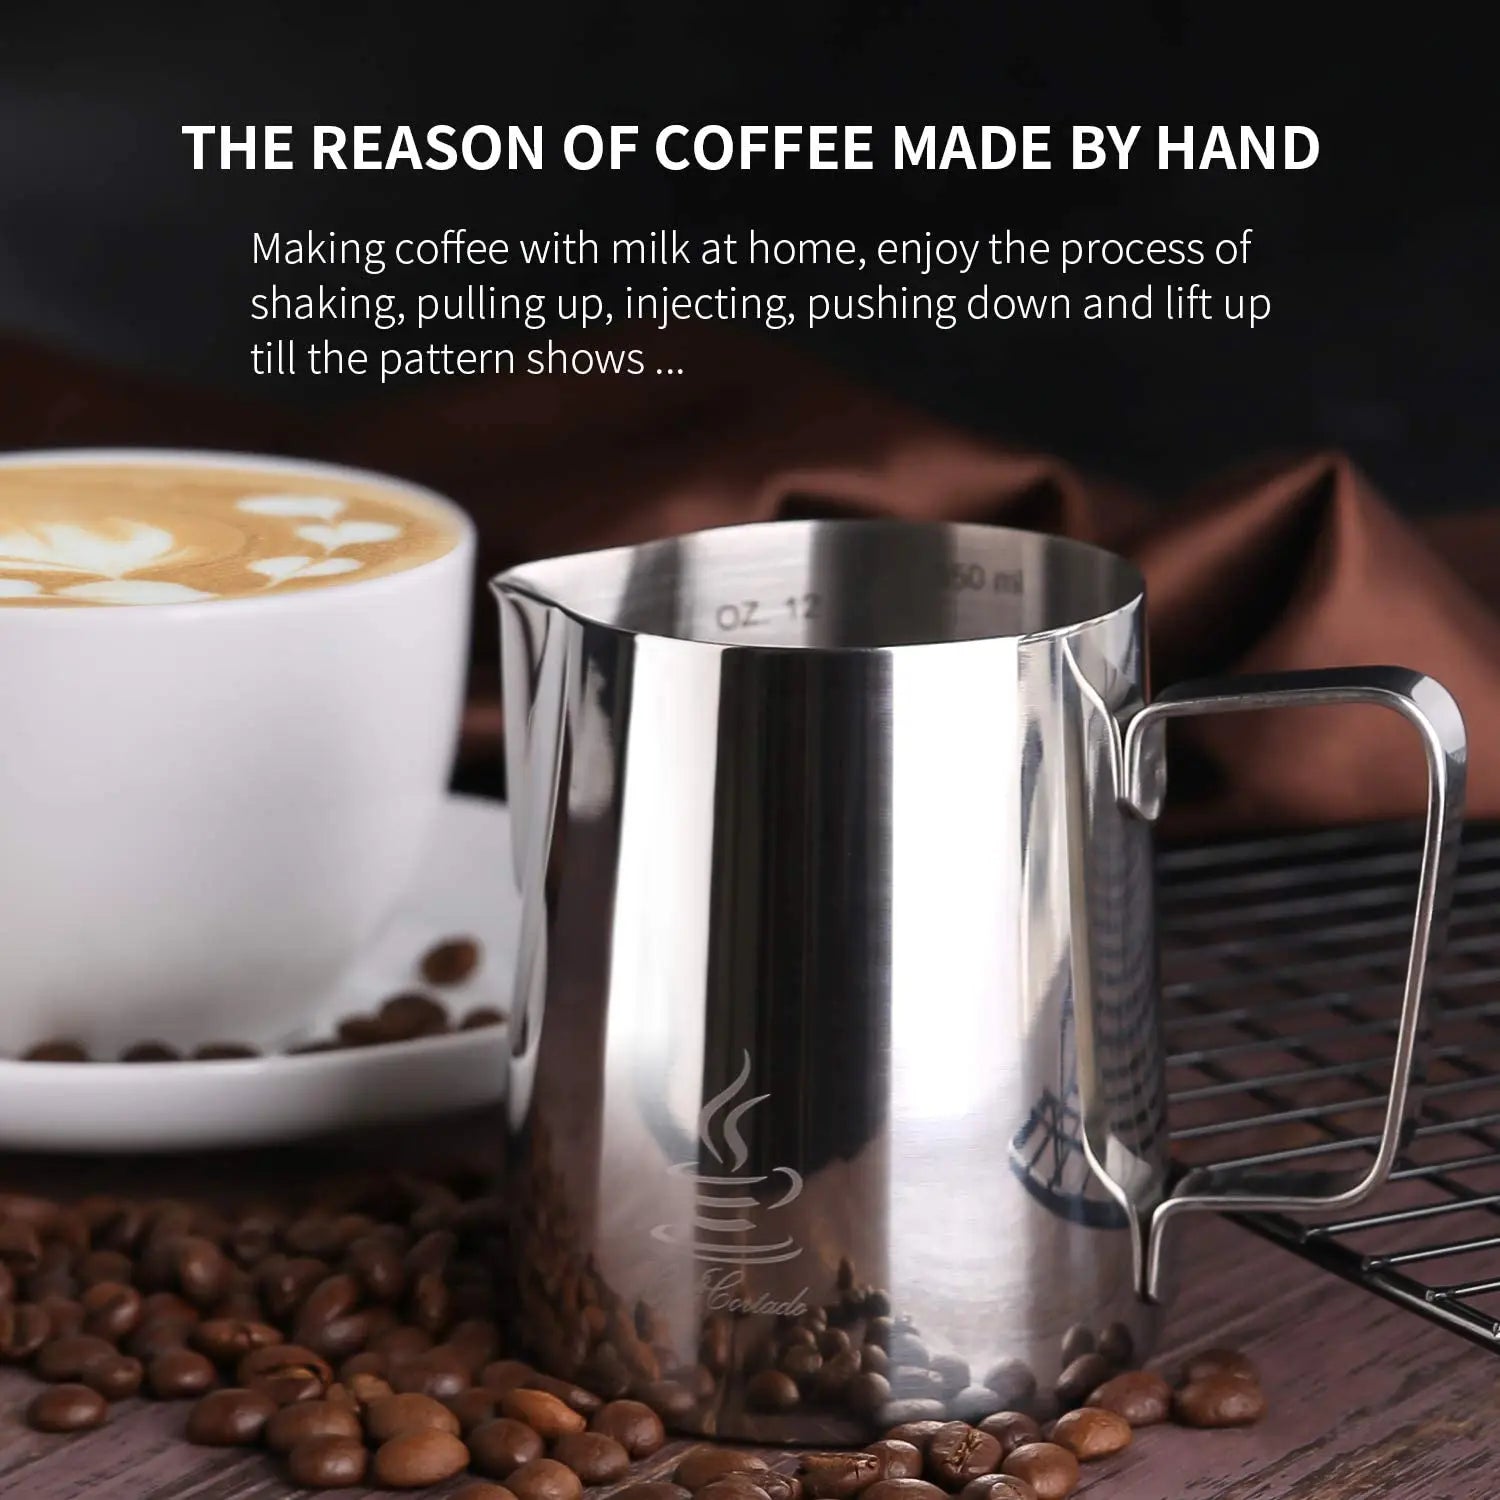 Milk Frothing Pitcher 32oz,Espresso Steaming Pitcher 32oz,Espresso Machine  Accessories,Milk Frother Cup 32oz,Milk Coffee Cappuccino Latte  Art,Stainless Steel Jug